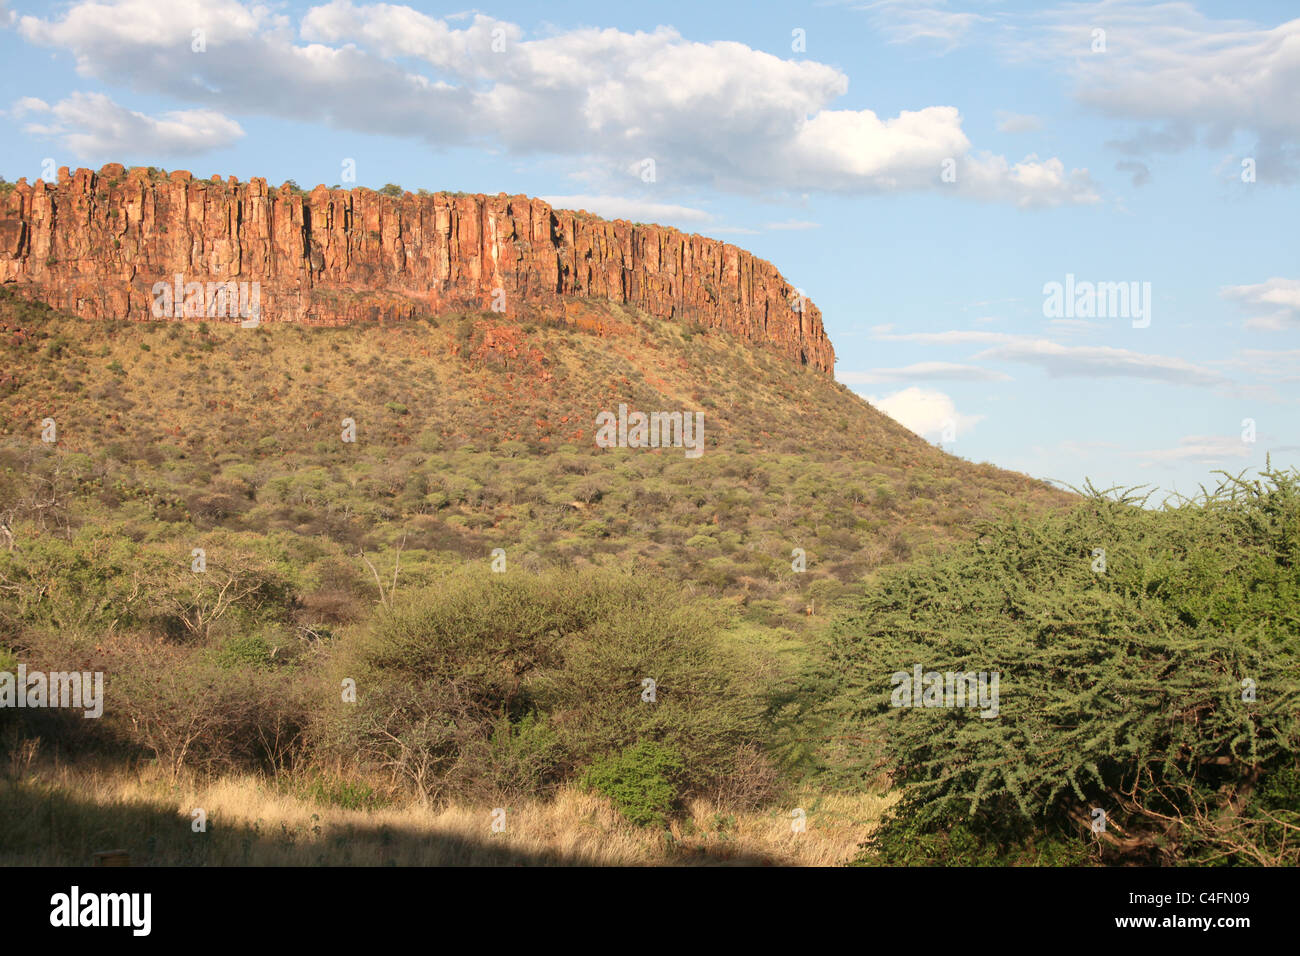 The Waterberg plateau, Central Namibia Stock Photo